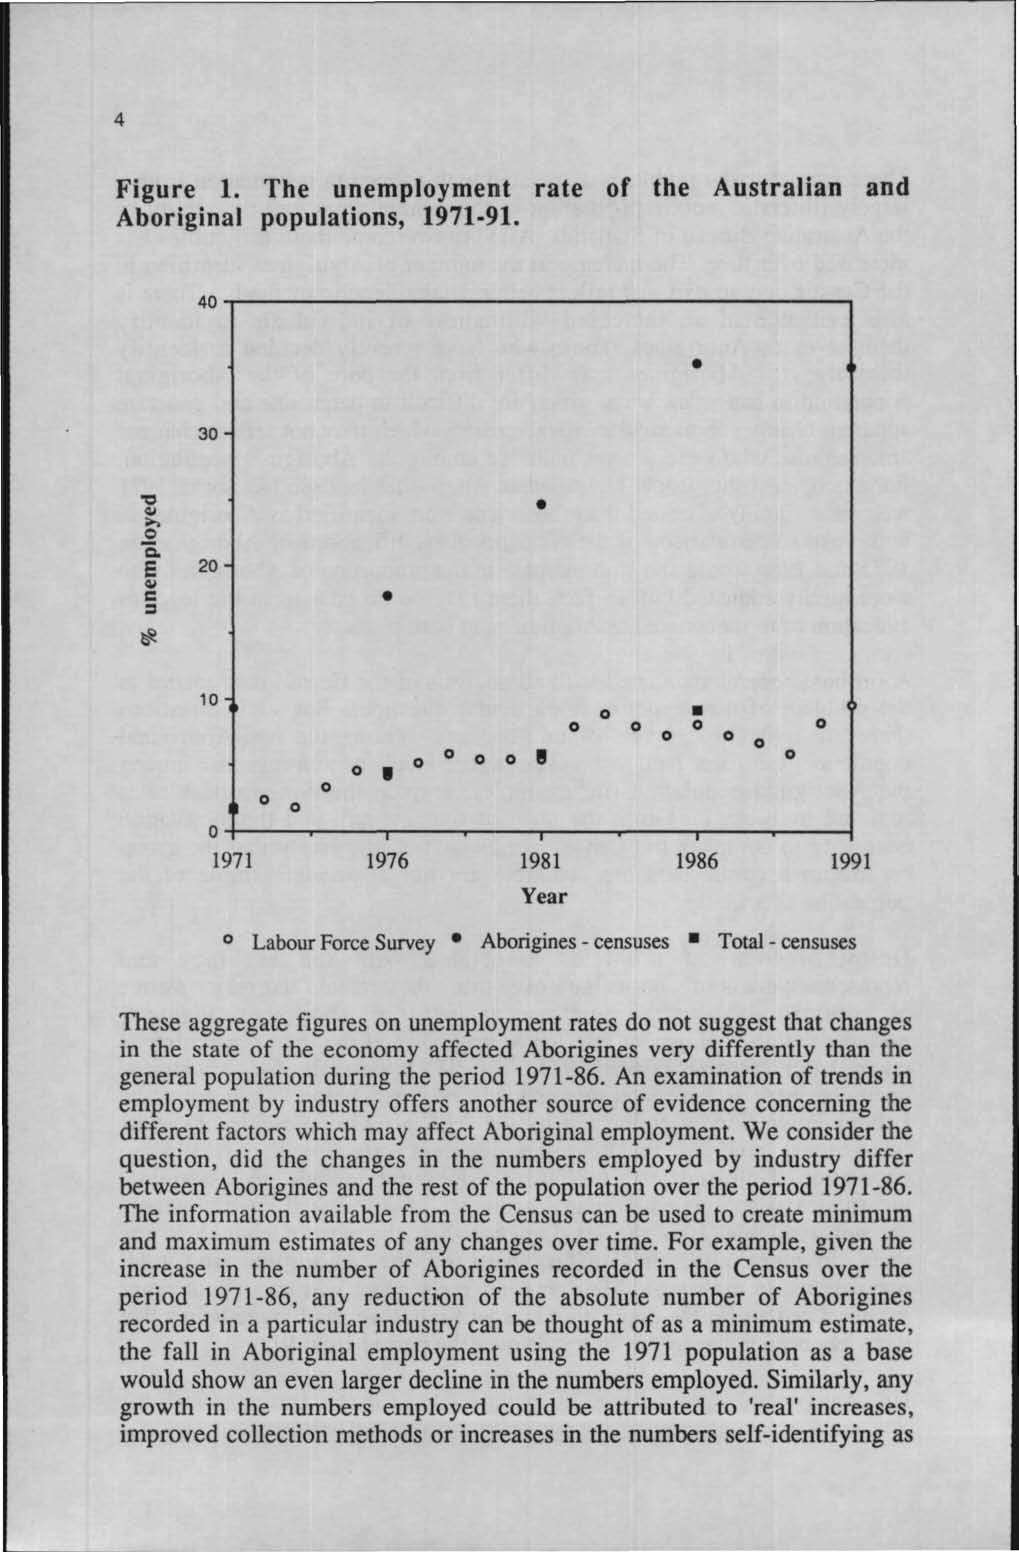 Figure 1. The unemployment rate of the Australian and Aboriginal populations, 1971-91.